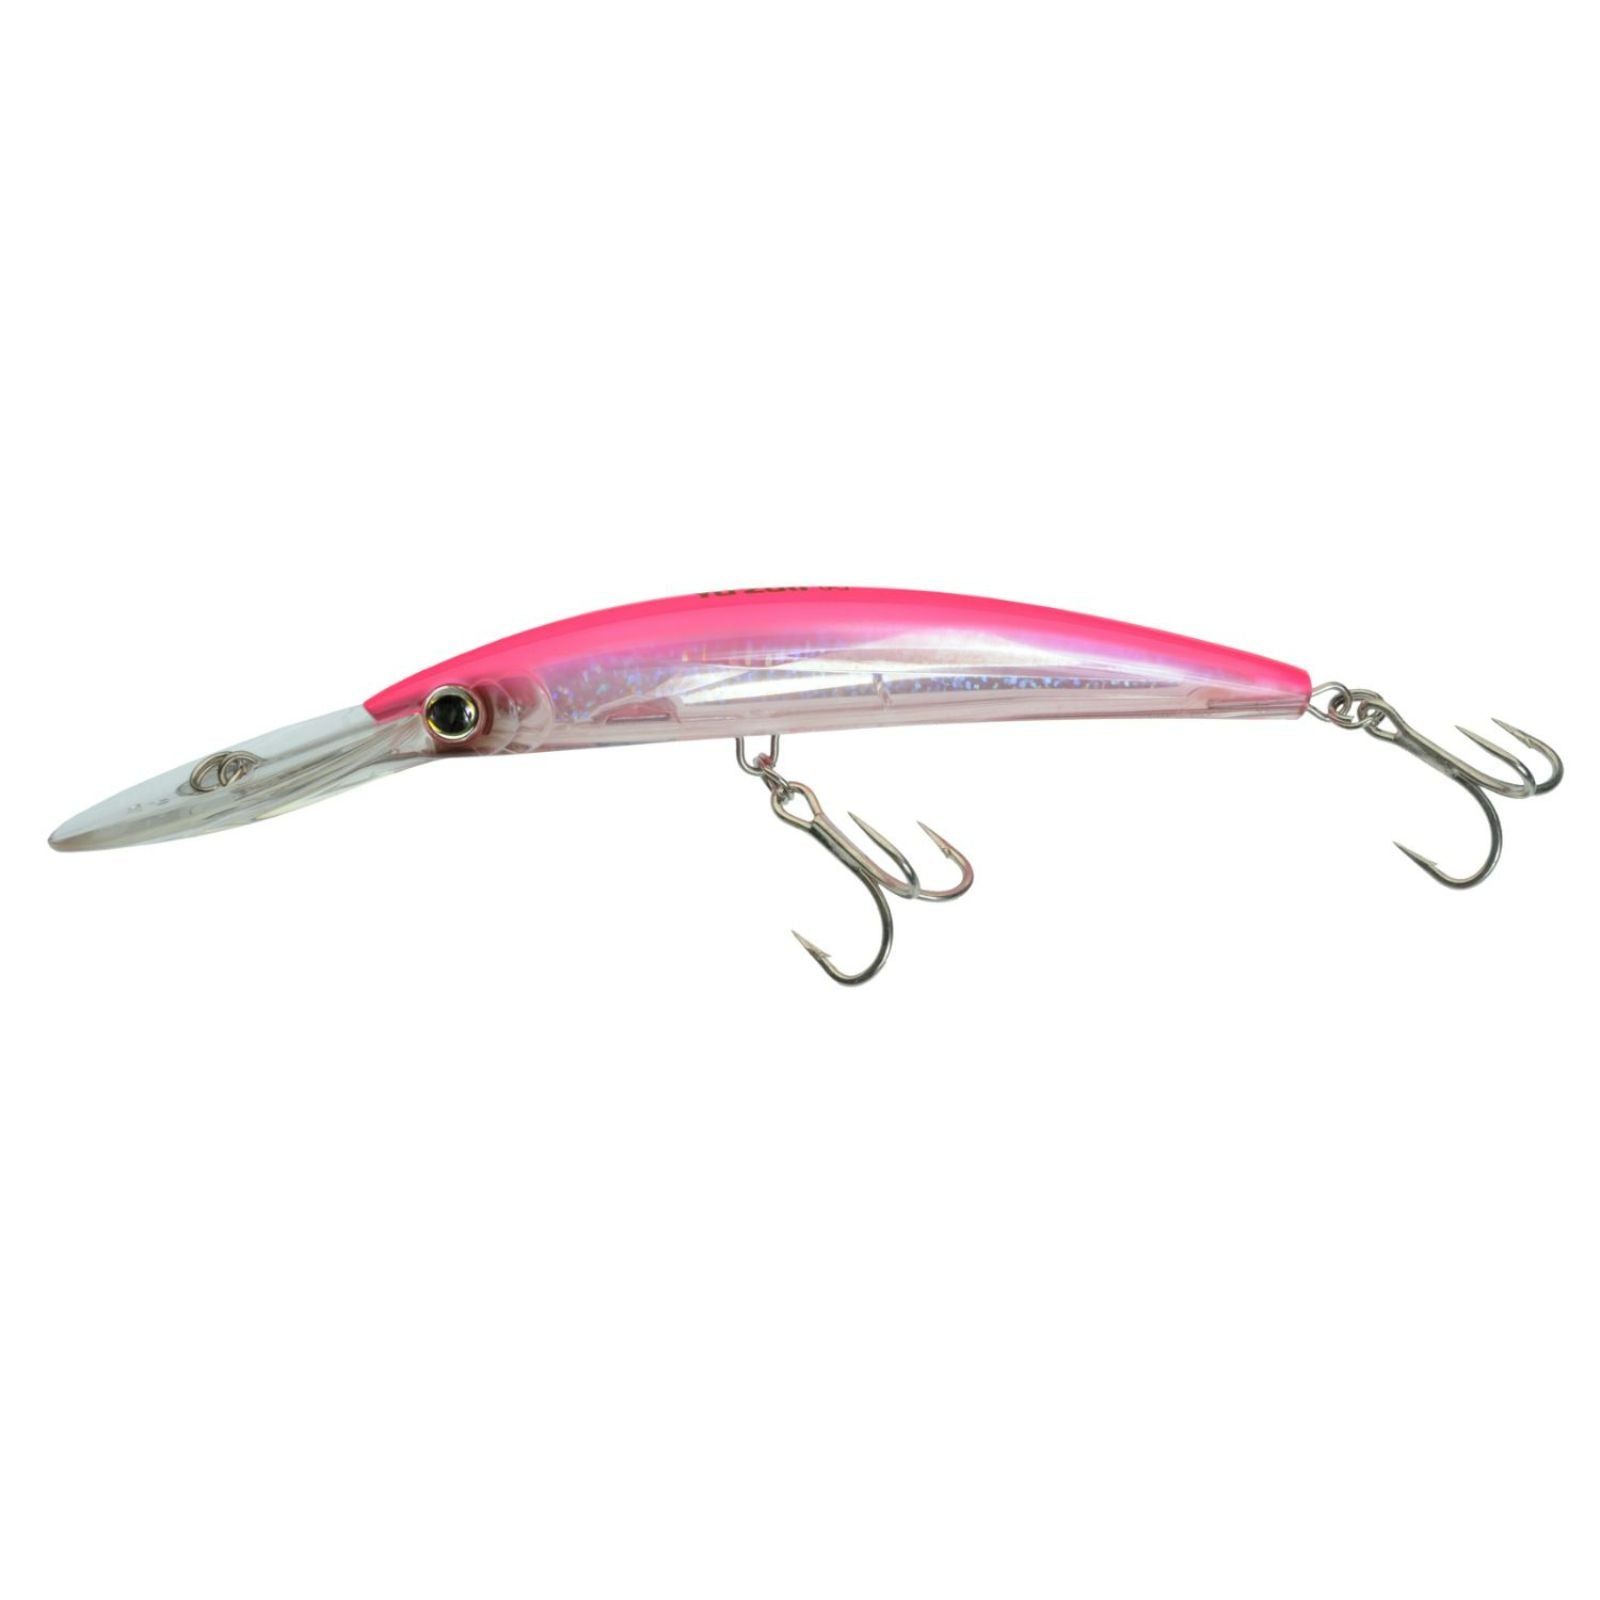 Fluoro Pink 130mm 5.25inch Yo-Zuri Crystal 3D Minnow Deep Diver Lures from  Fish On Outlet